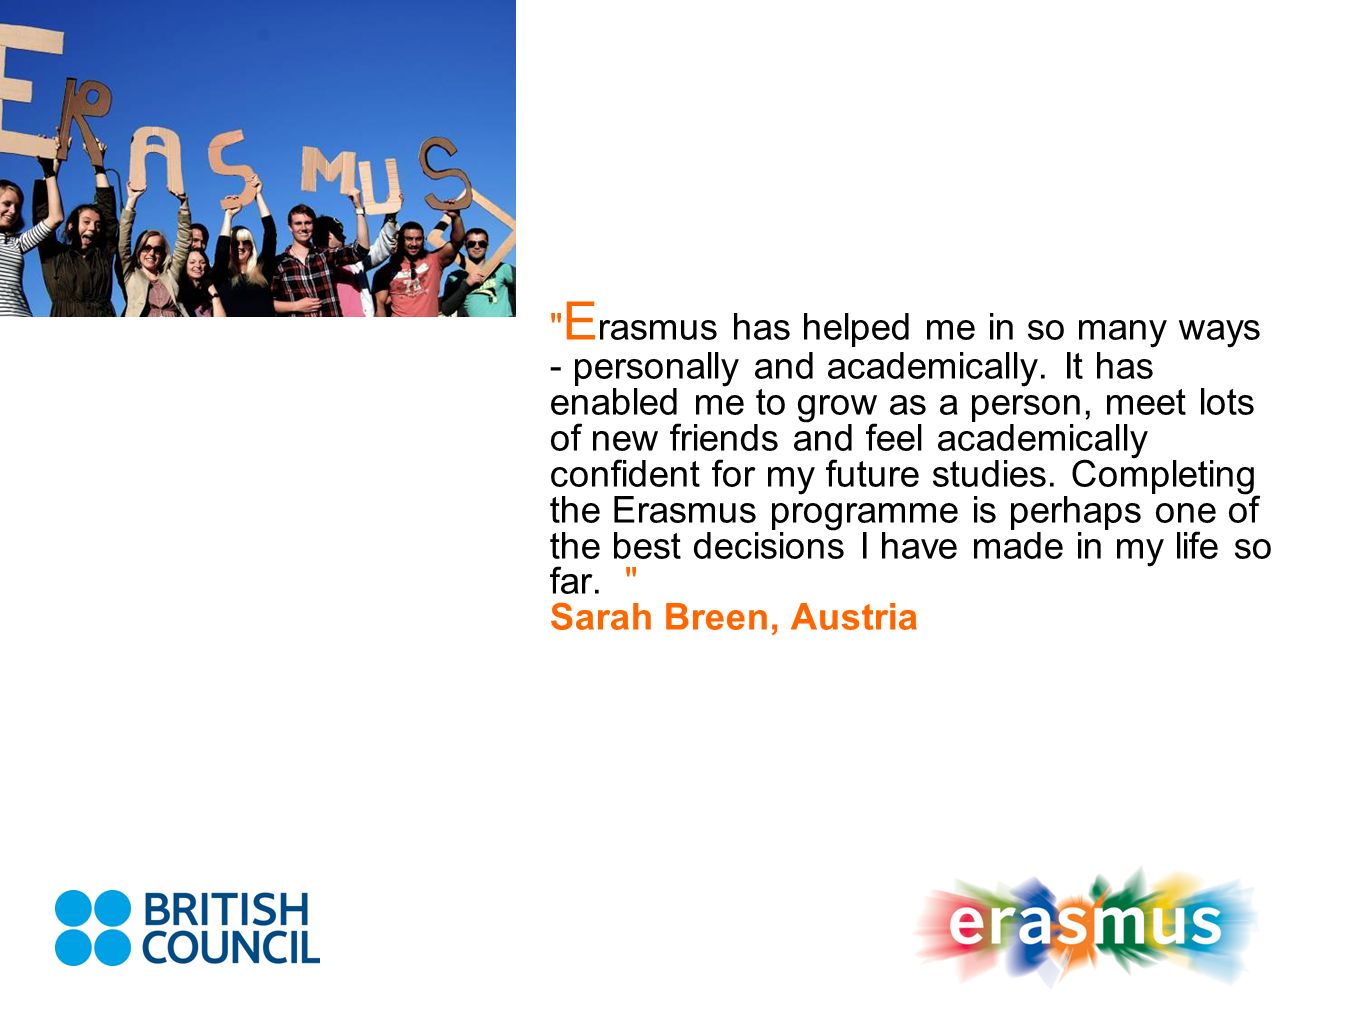 Erasmus has helped me in so many ways - personally and academically